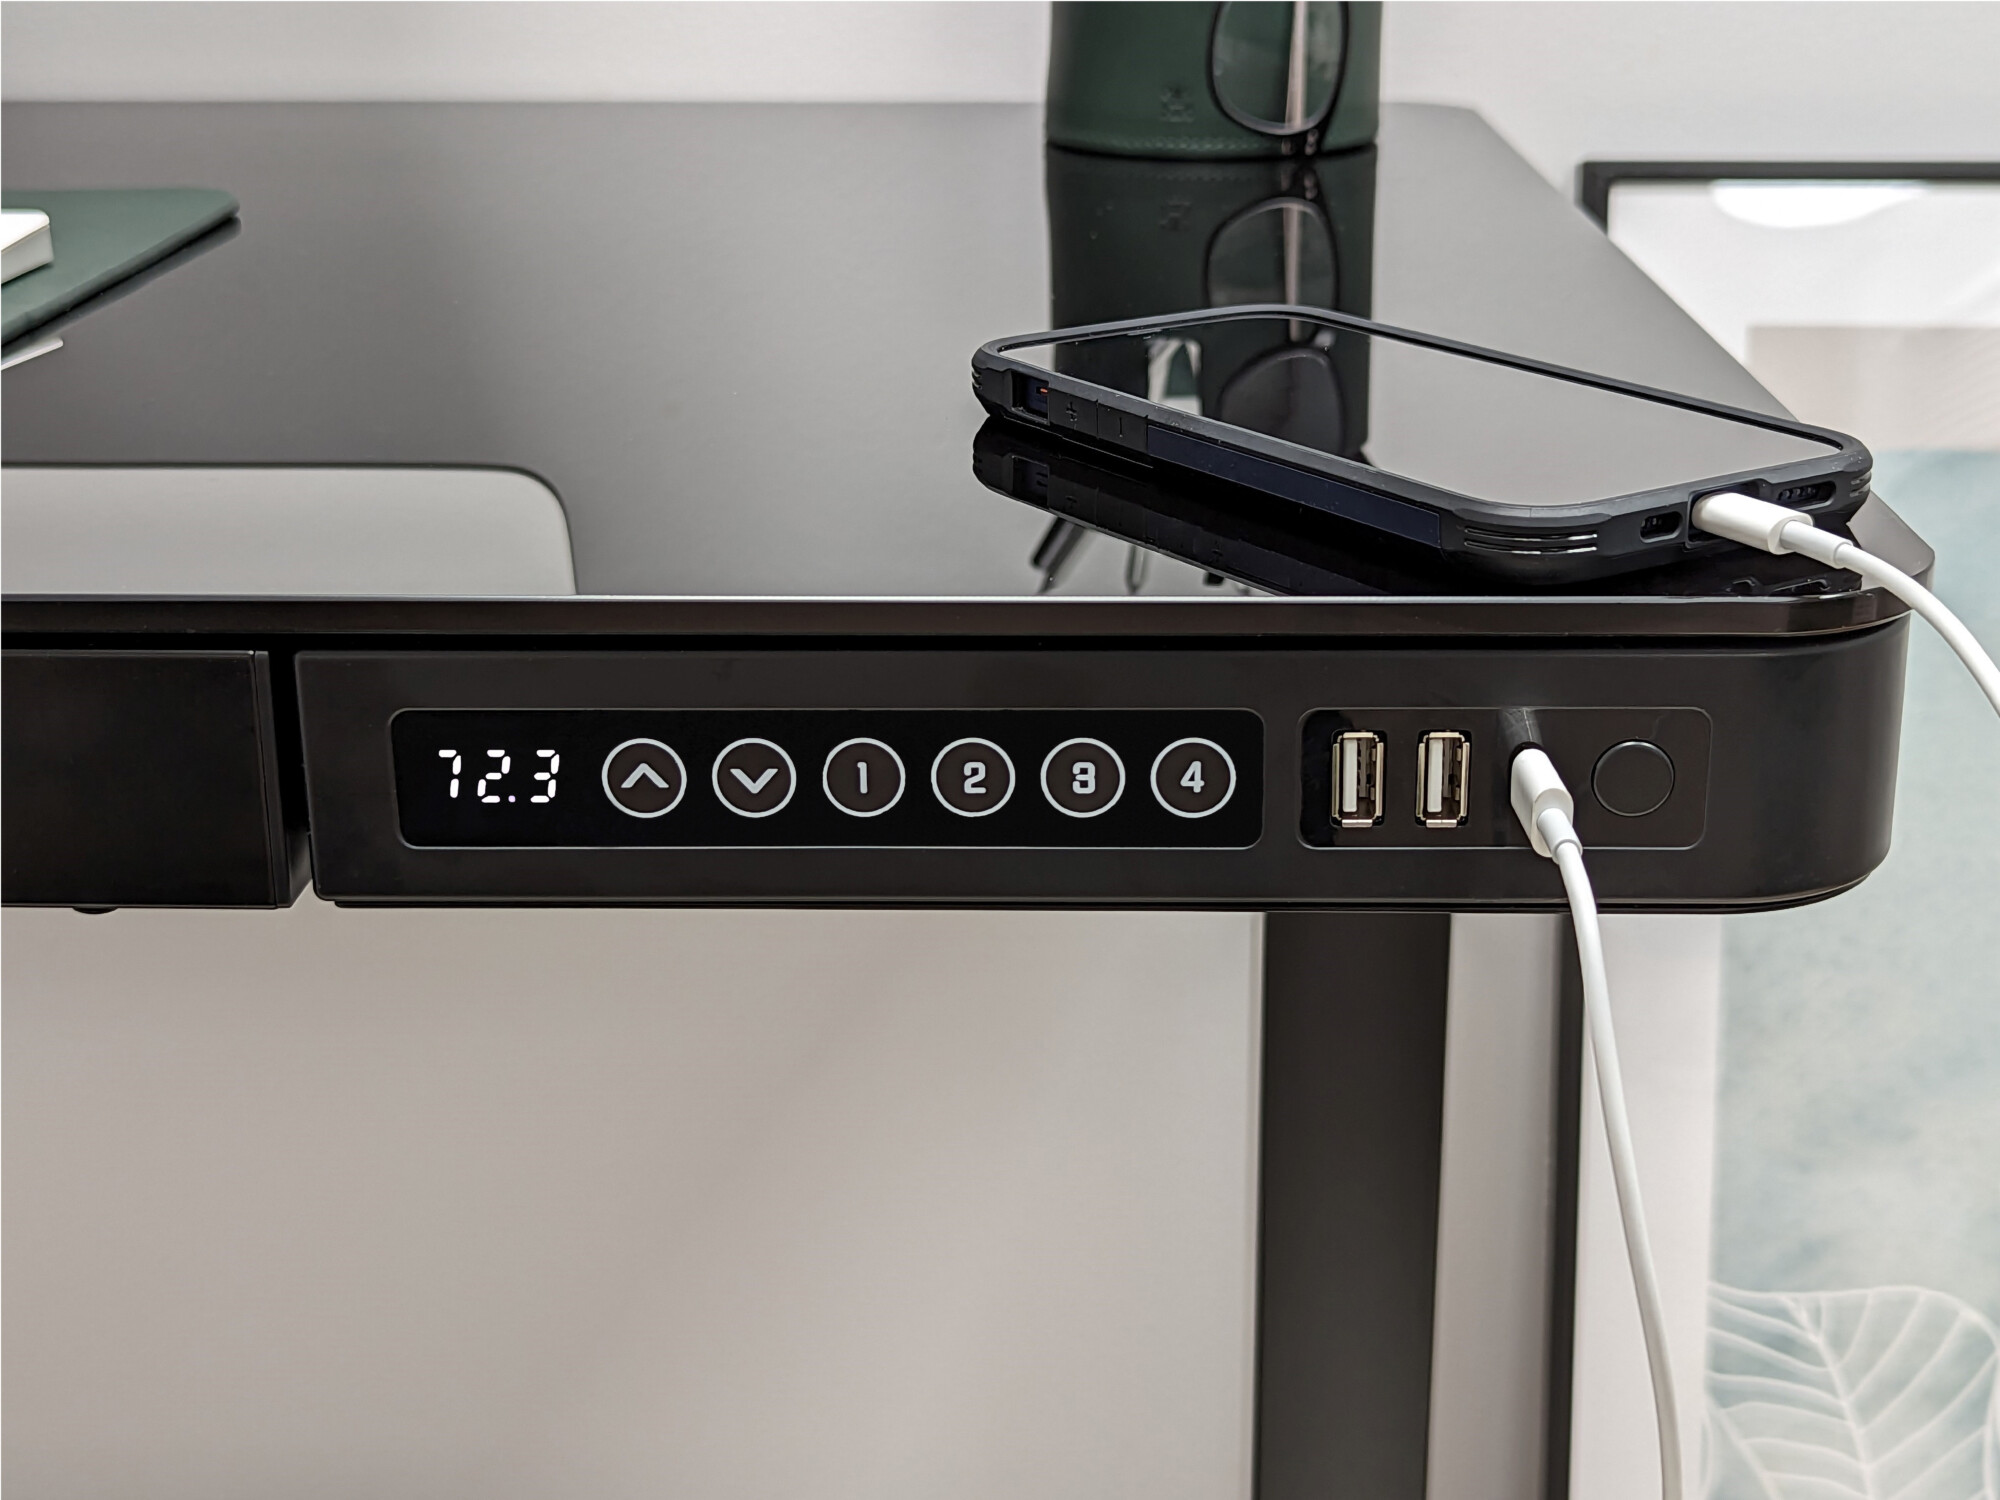 The ORKA Jupiter black glass electric height adjustable desk features a USB charging port, USB-C charging port, x4 memory settings and height adjustability with LED screen. 